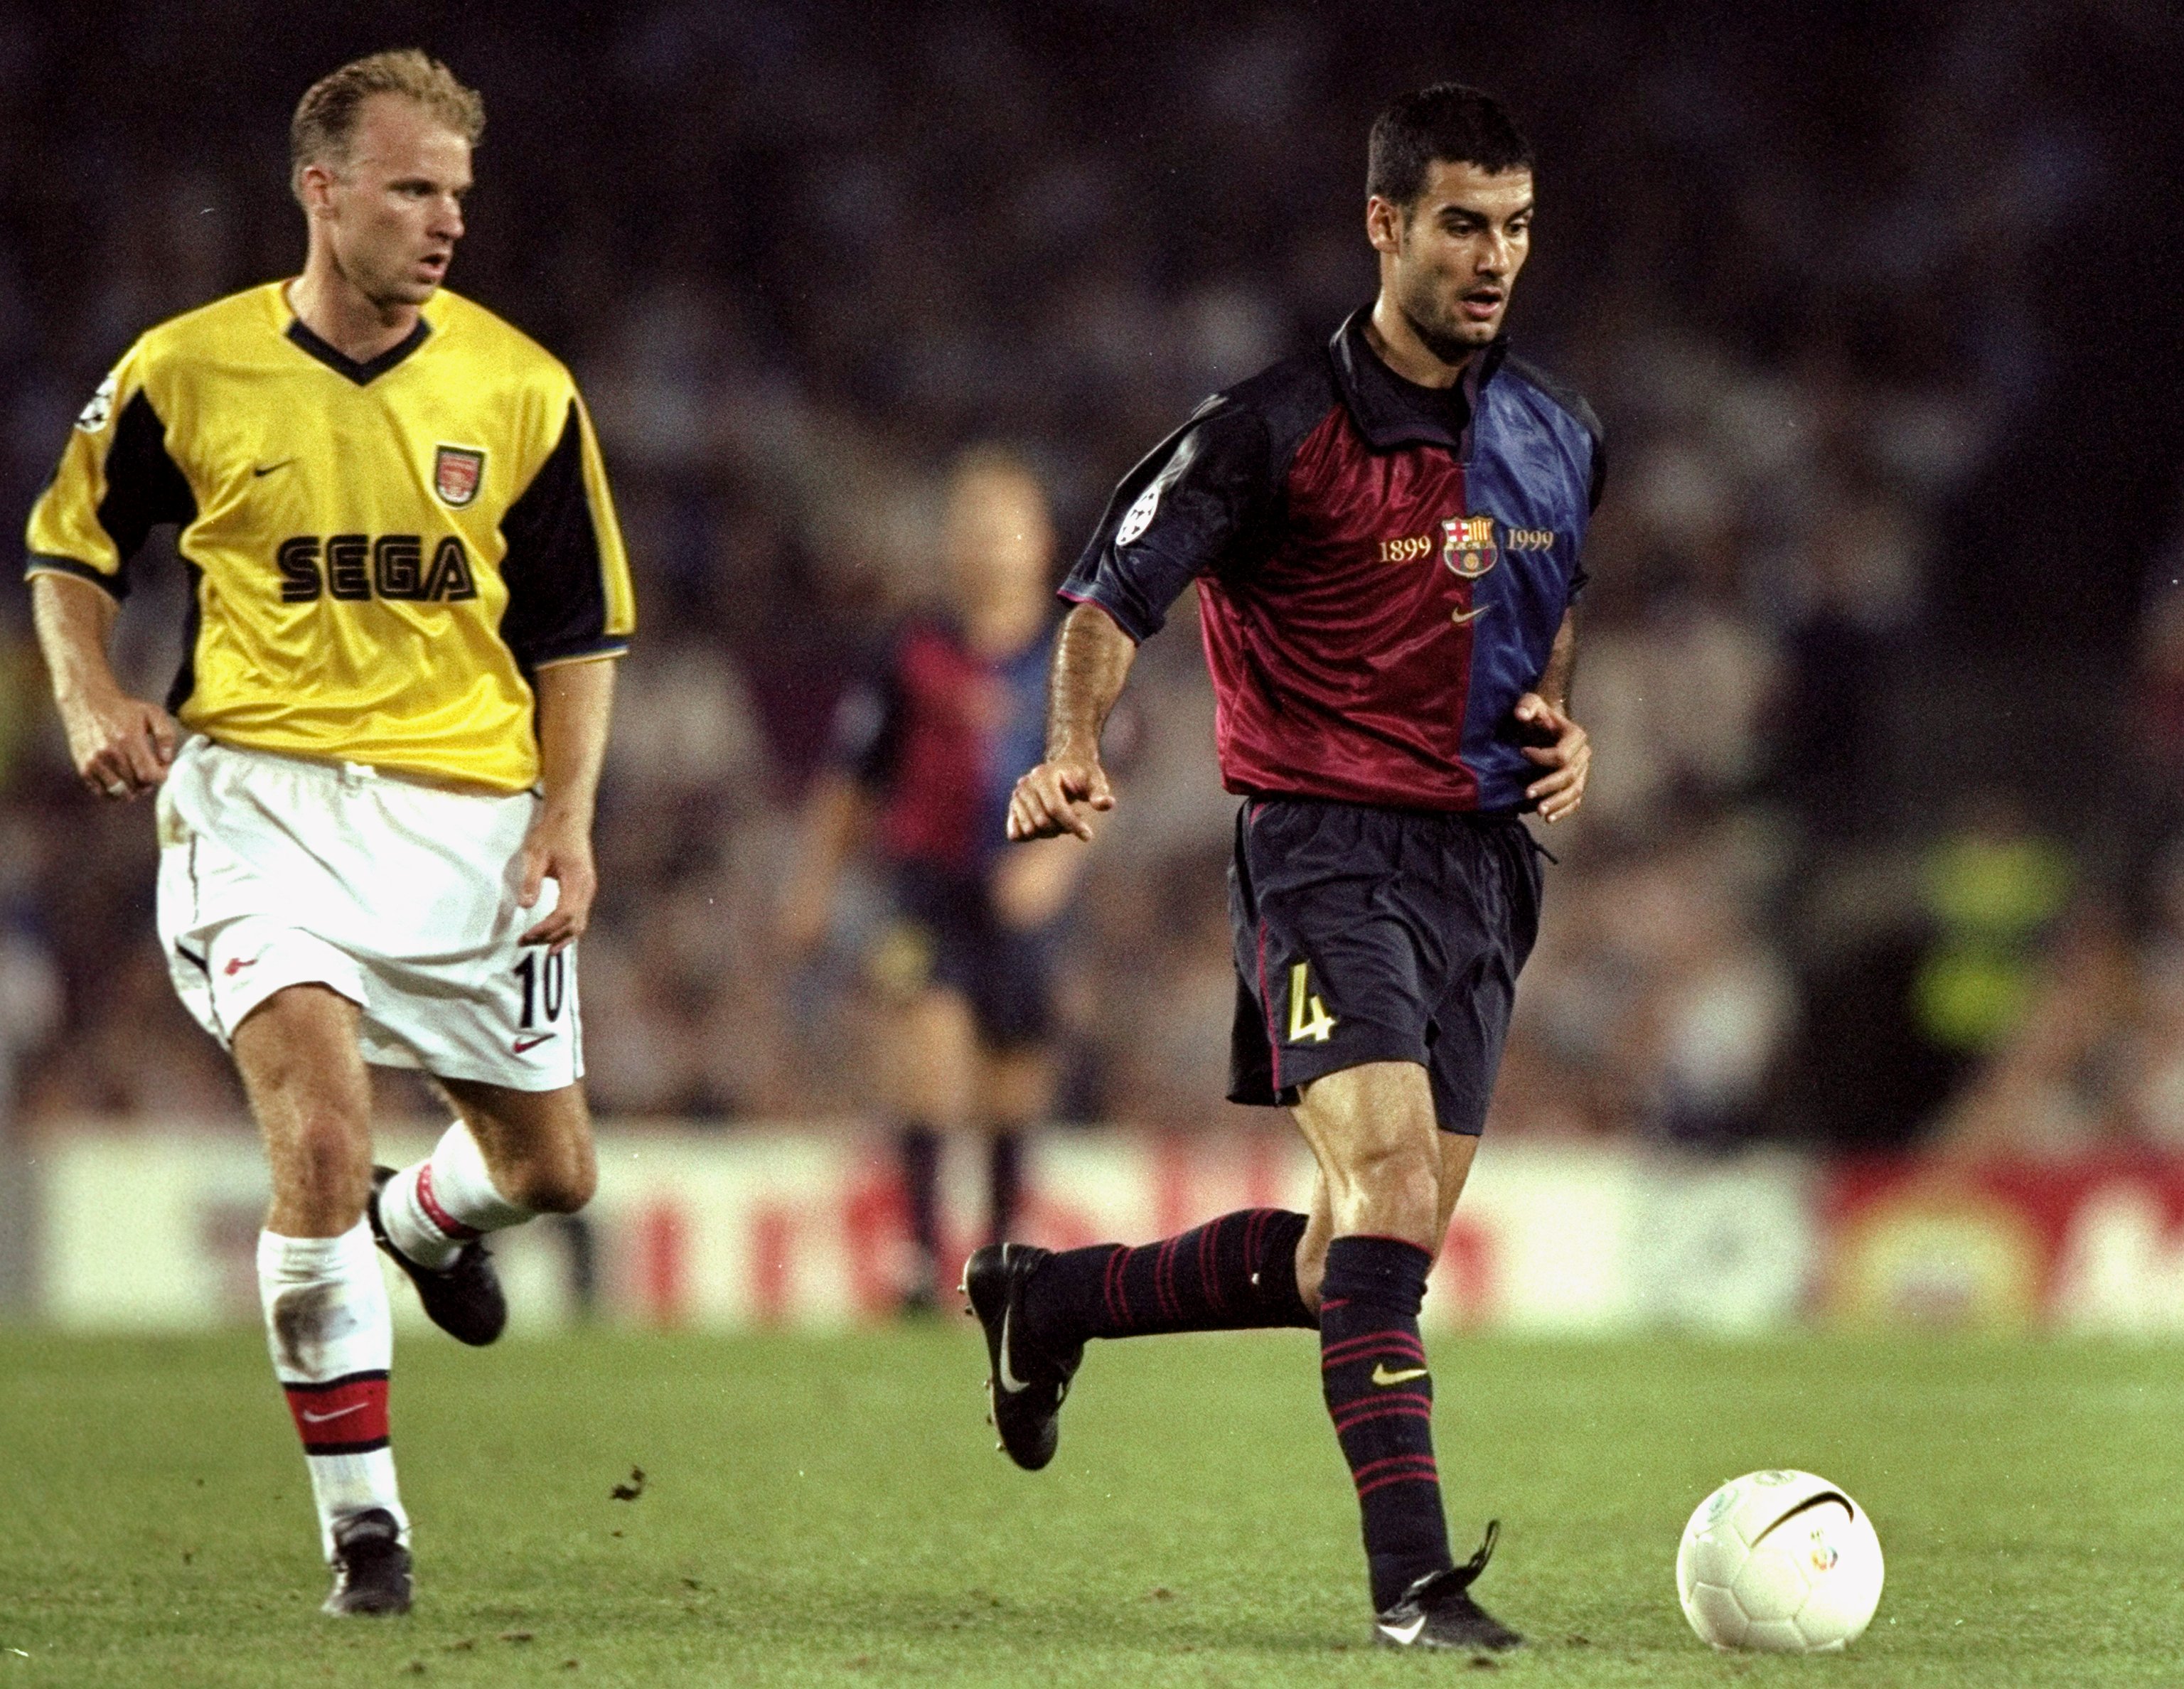 Barcelona midfielder Pep Guardiola on the ball against Arsenal as Dennis Bergkamp gives chase in a Champions League game in 1999.